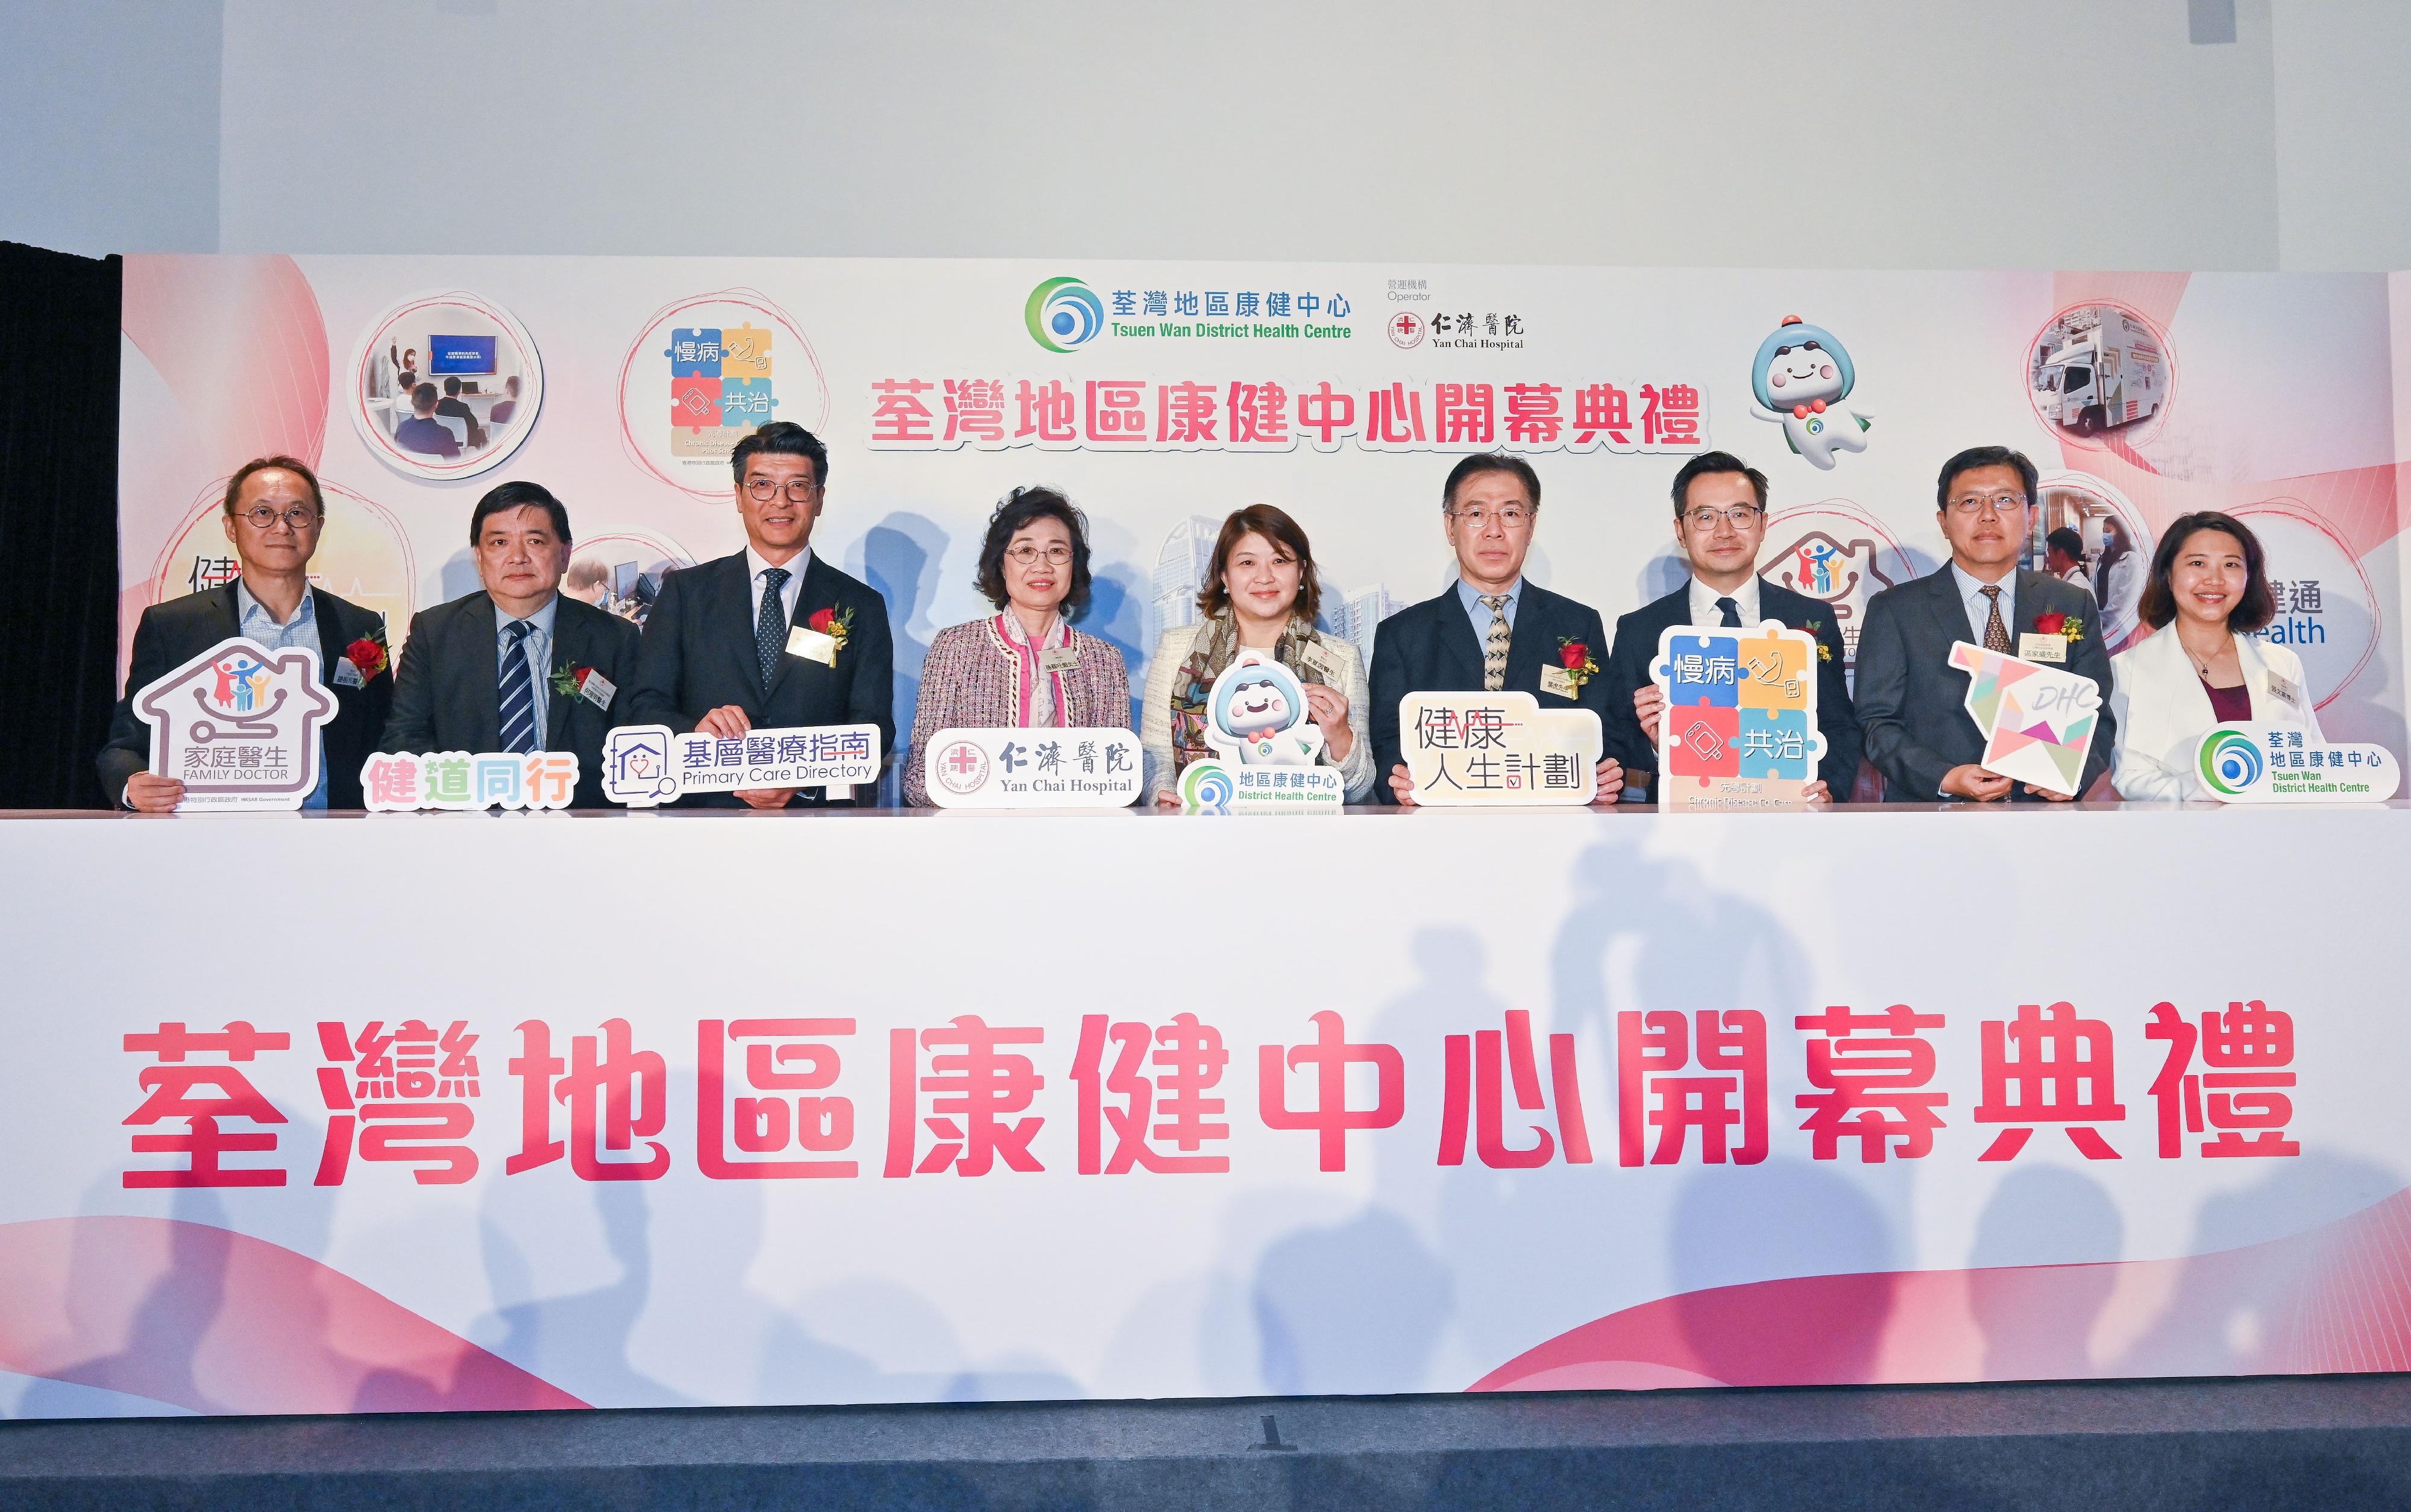 The Under Secretary for Health, Dr Libby Lee (centre), joined by Deputy Director General of the New Territories Sub-office of the Liaison Office of the Central People's Government in the Hong Kong Special Administrative Region Mr Ye Hu (fourth right); Deputy Secretary for Health Mr Eddie Lee (third right); the Commissioner for Primary Healthcare, Dr Pang Fei-chau (third left); the Assistant Director of Health (Elderly Health), Dr Raymond Ho (second left); the Chairman of the Board of Directors of Yan Chai Hospital, Mrs Mary Suen (fourth left), and other guests, officiate at the opening ceremony of the Tsuen Wan District Health Centre this afternoon (December 15).